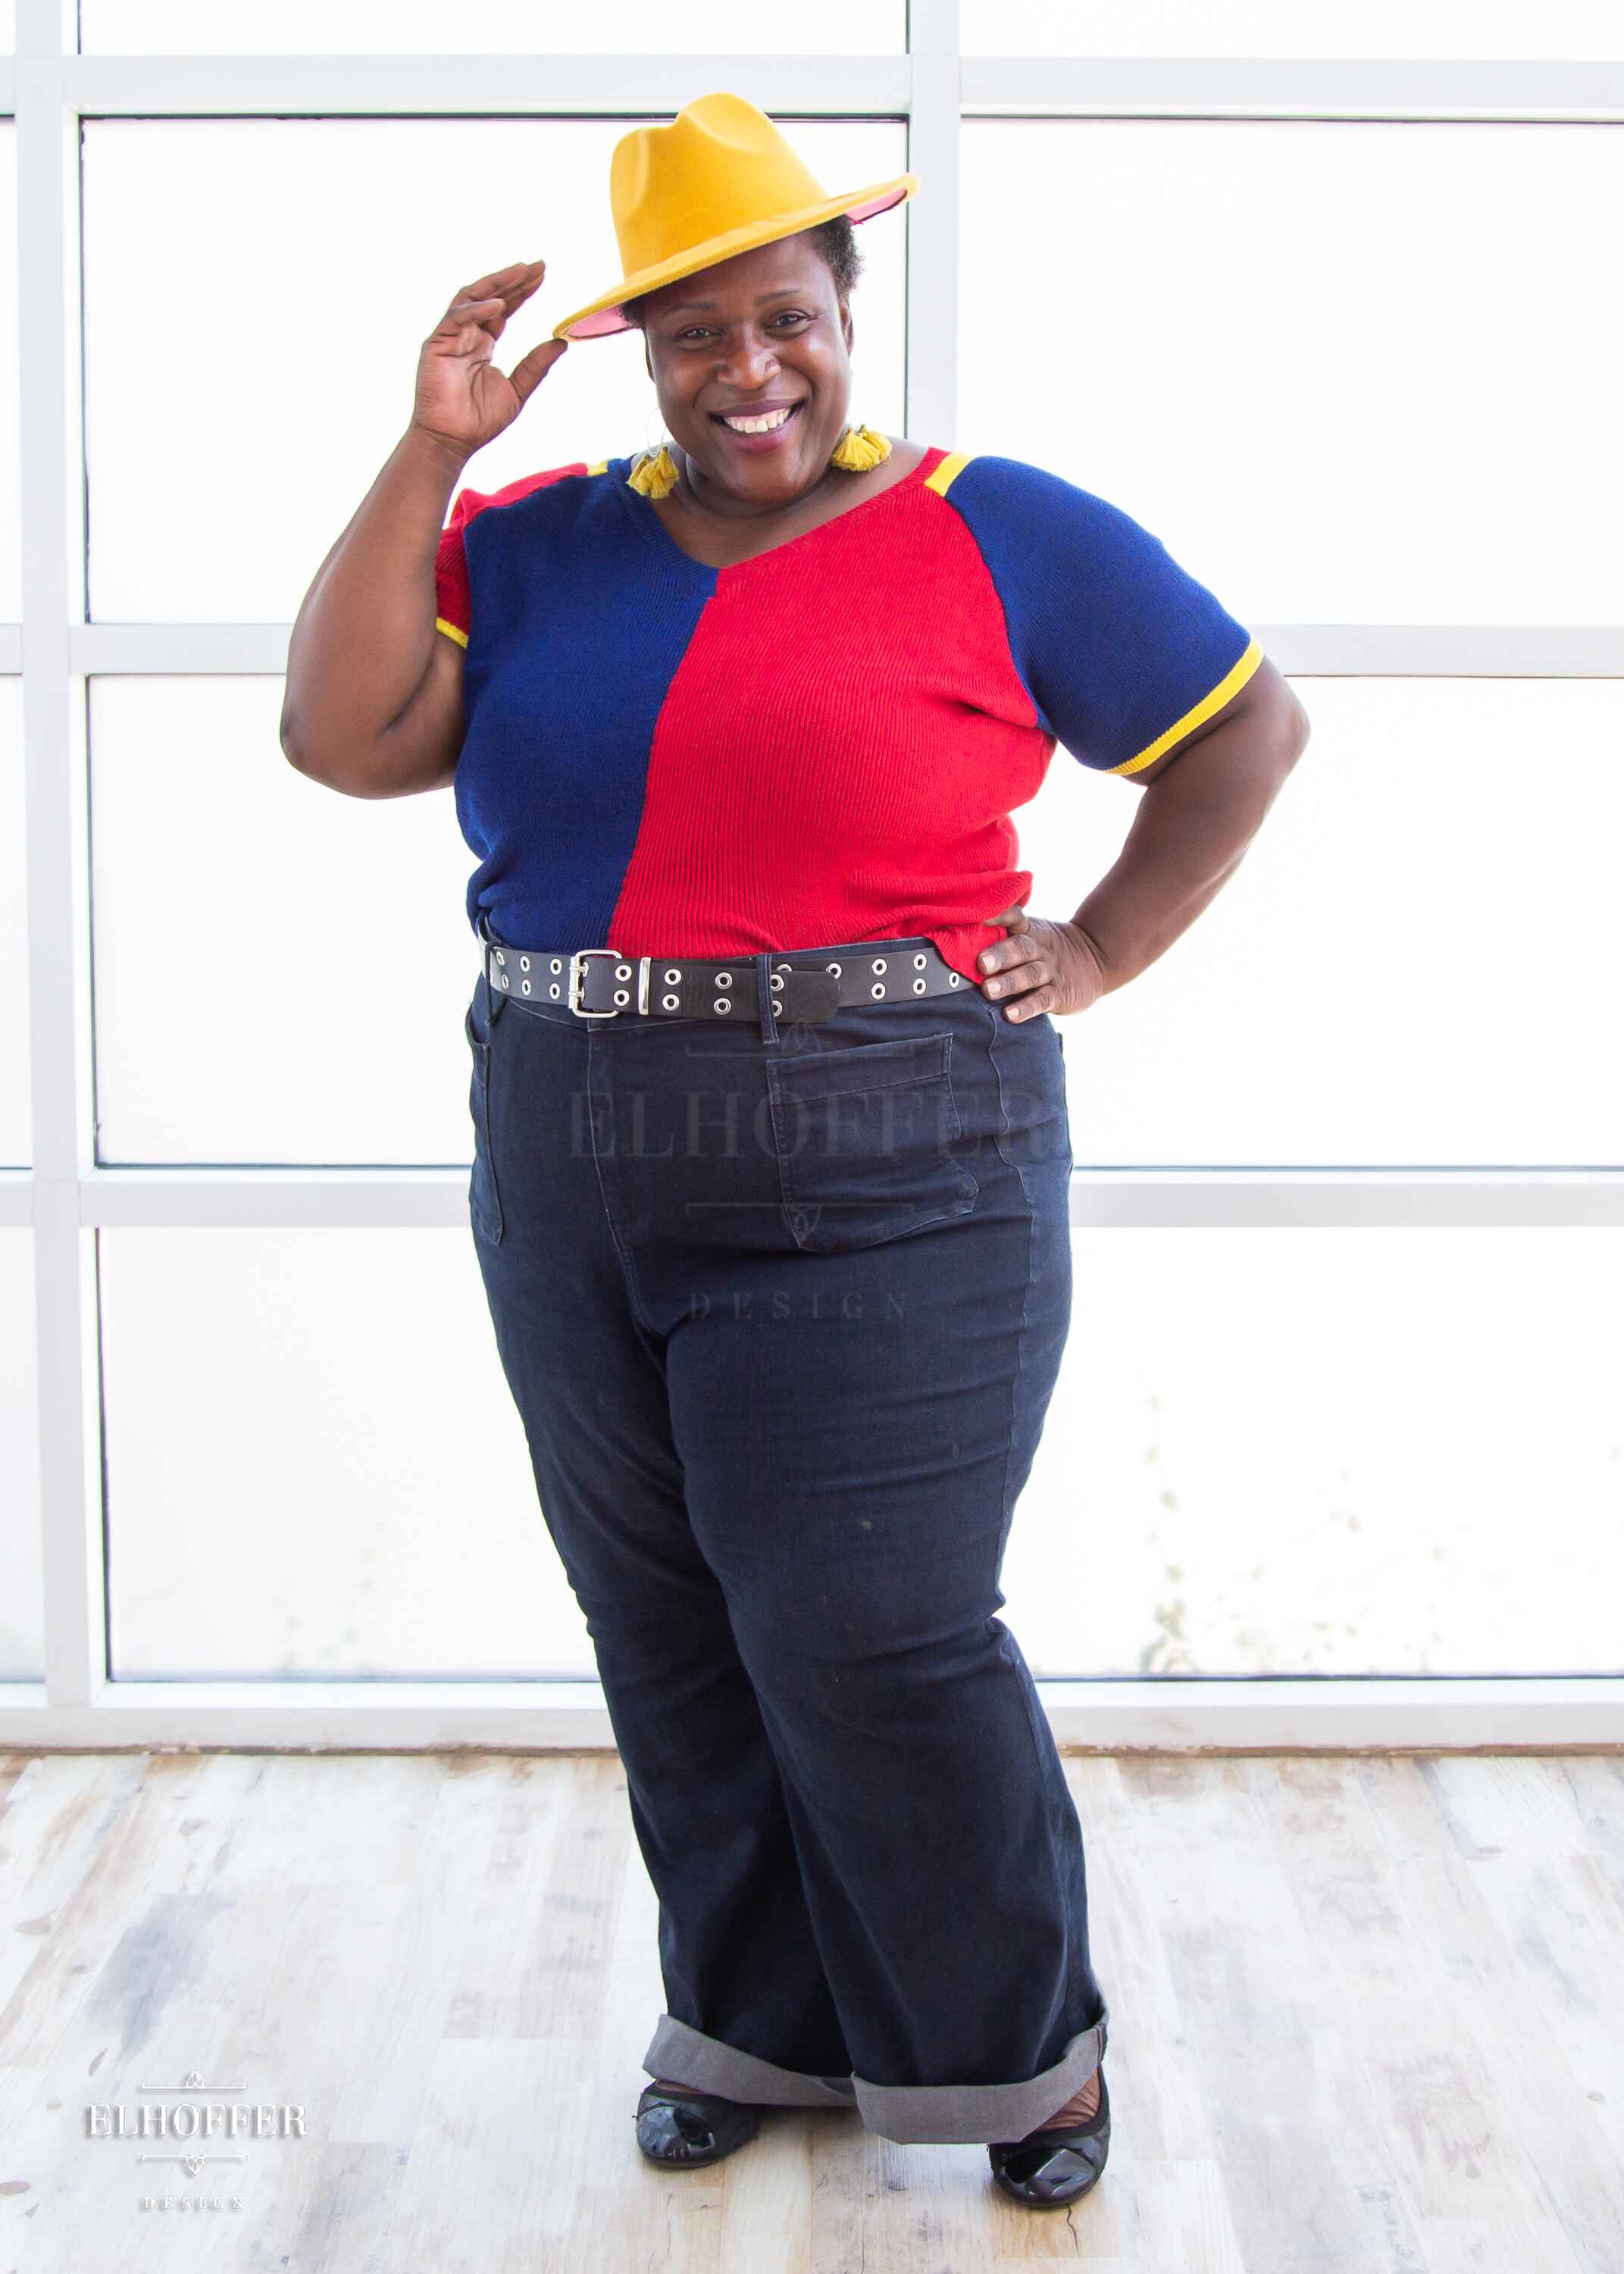 Adalgiza, a medium dark skinned 4xl model with short black super curly hair, is smiling while wearing a short sleeve knit top with alternating blue and red colors. There is yellow detailing along the top of the shoulder and around the cuff of the sleeve.